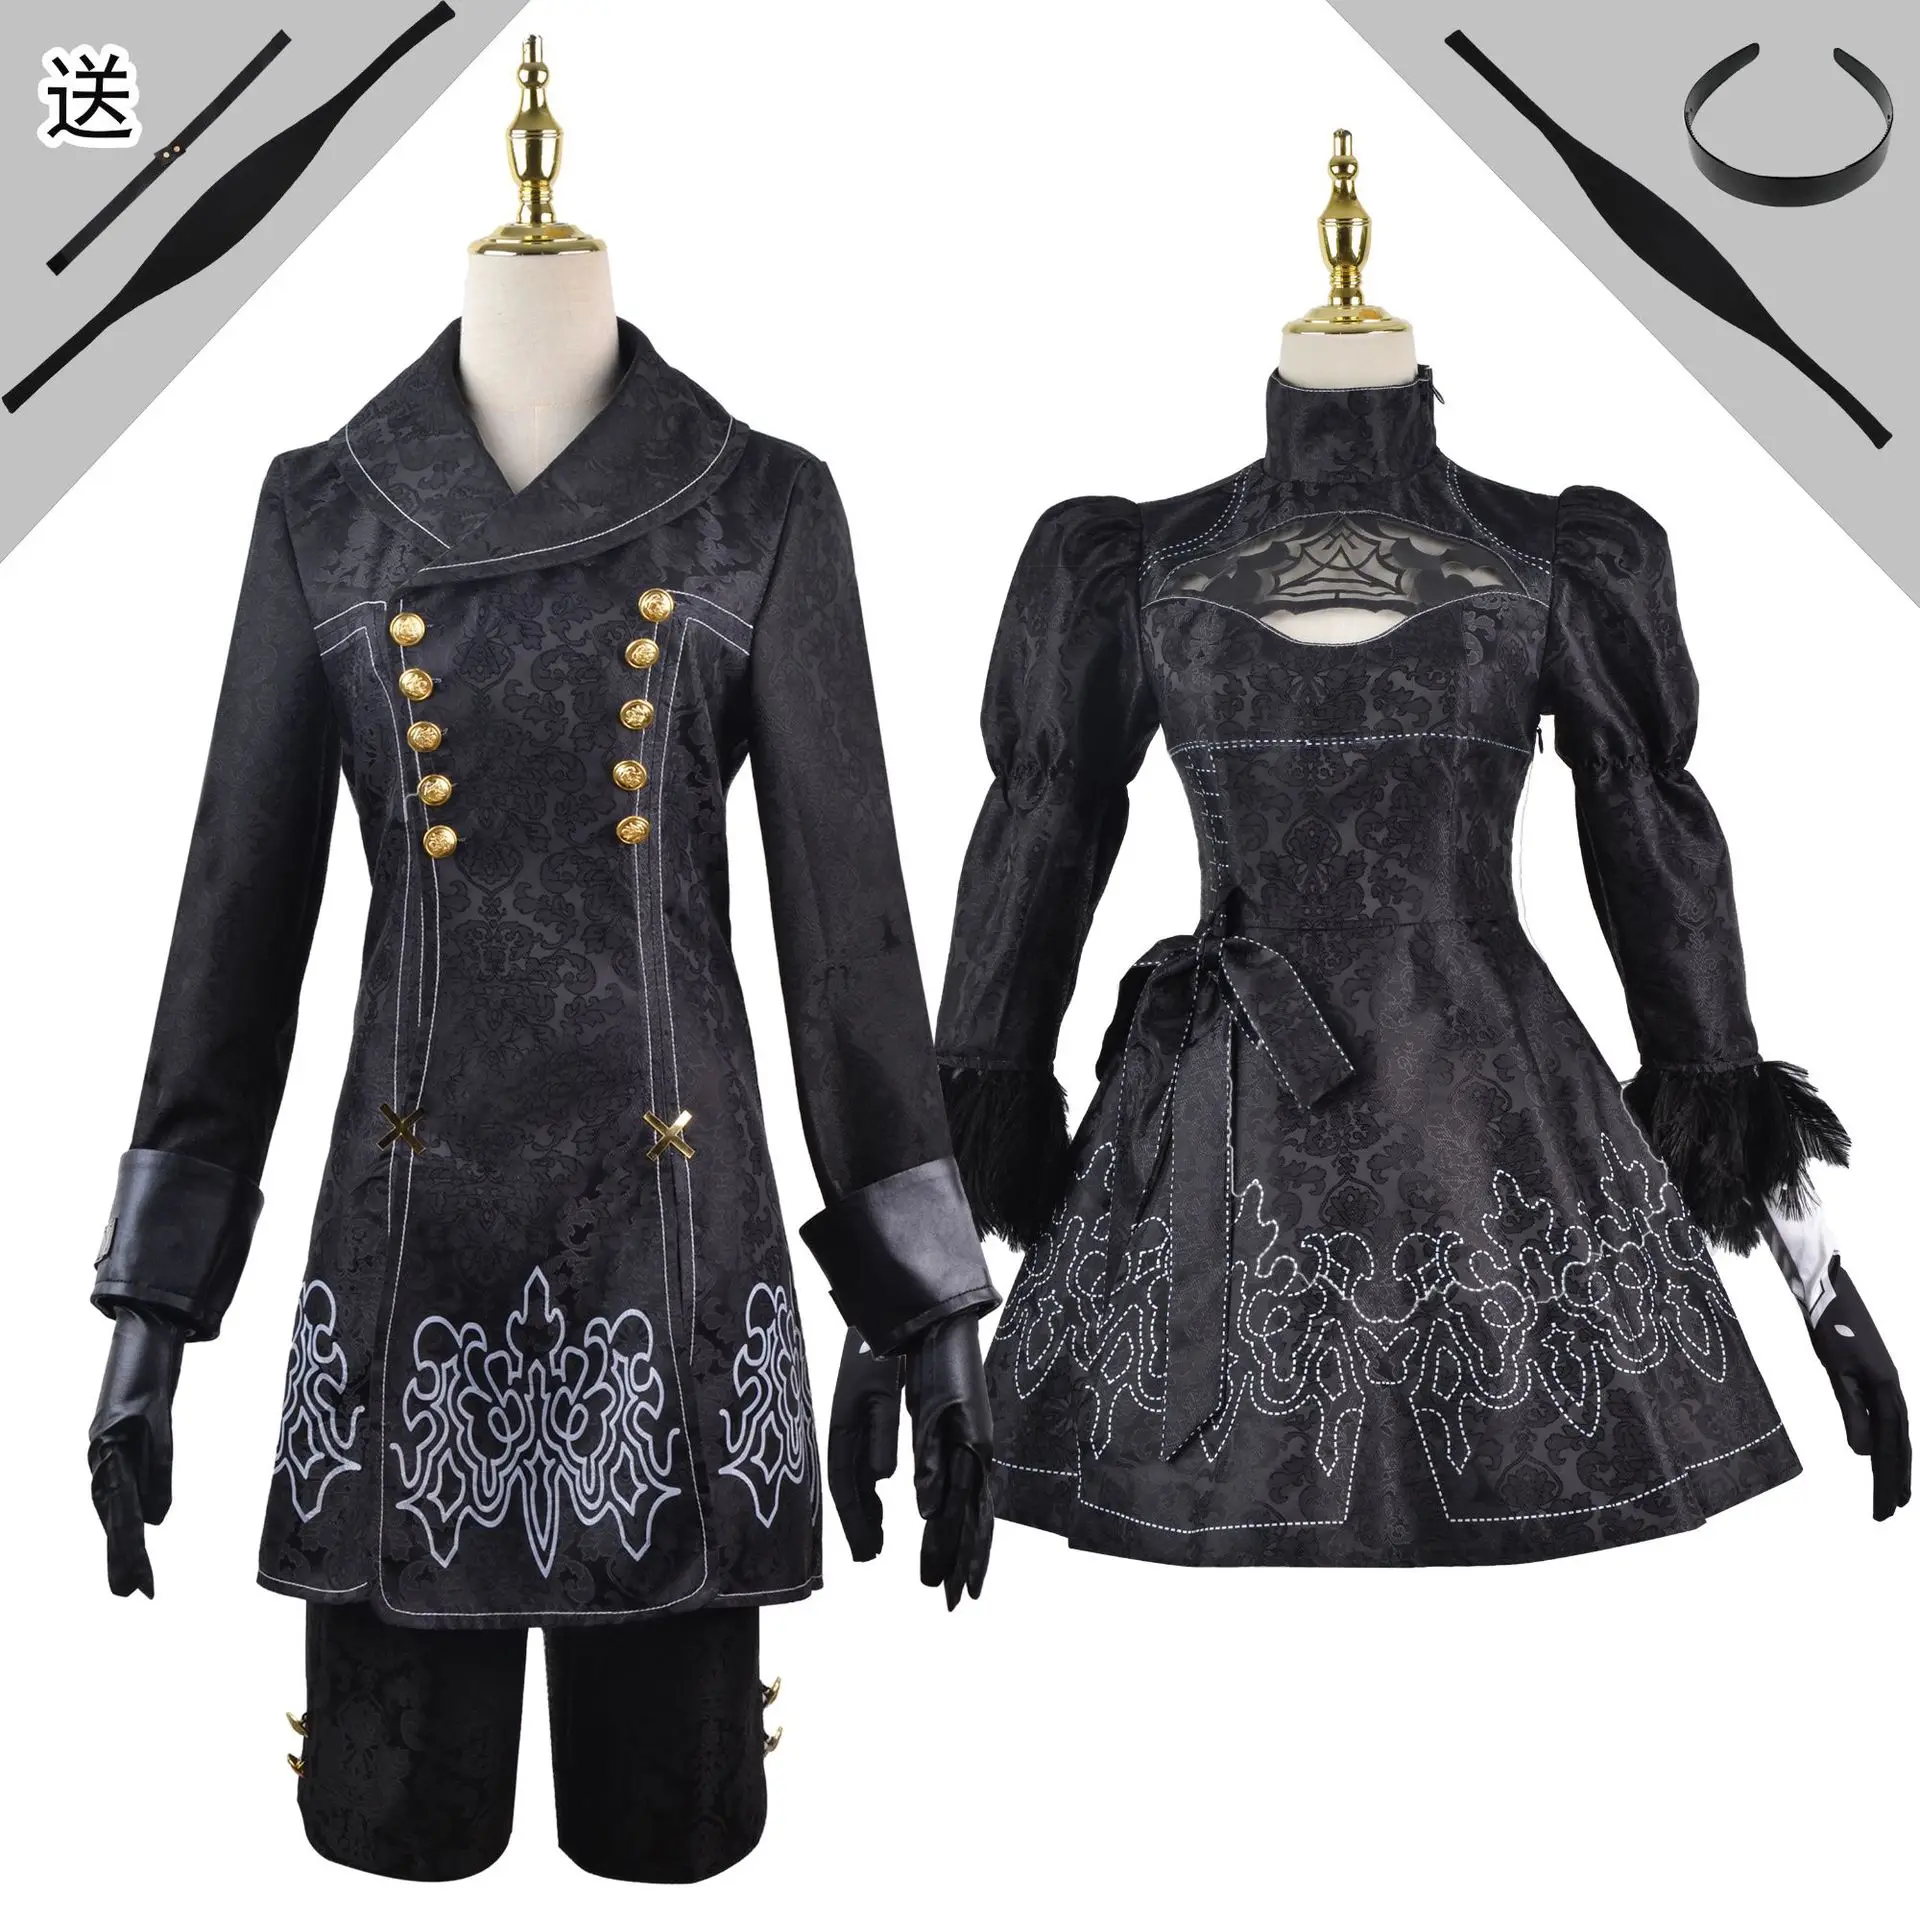 

Anime Nier Automata Cosplay Costume Yorha Type Outfit Games Suit Men Role Play Costumes Halloween Party Fancy 9S 2B